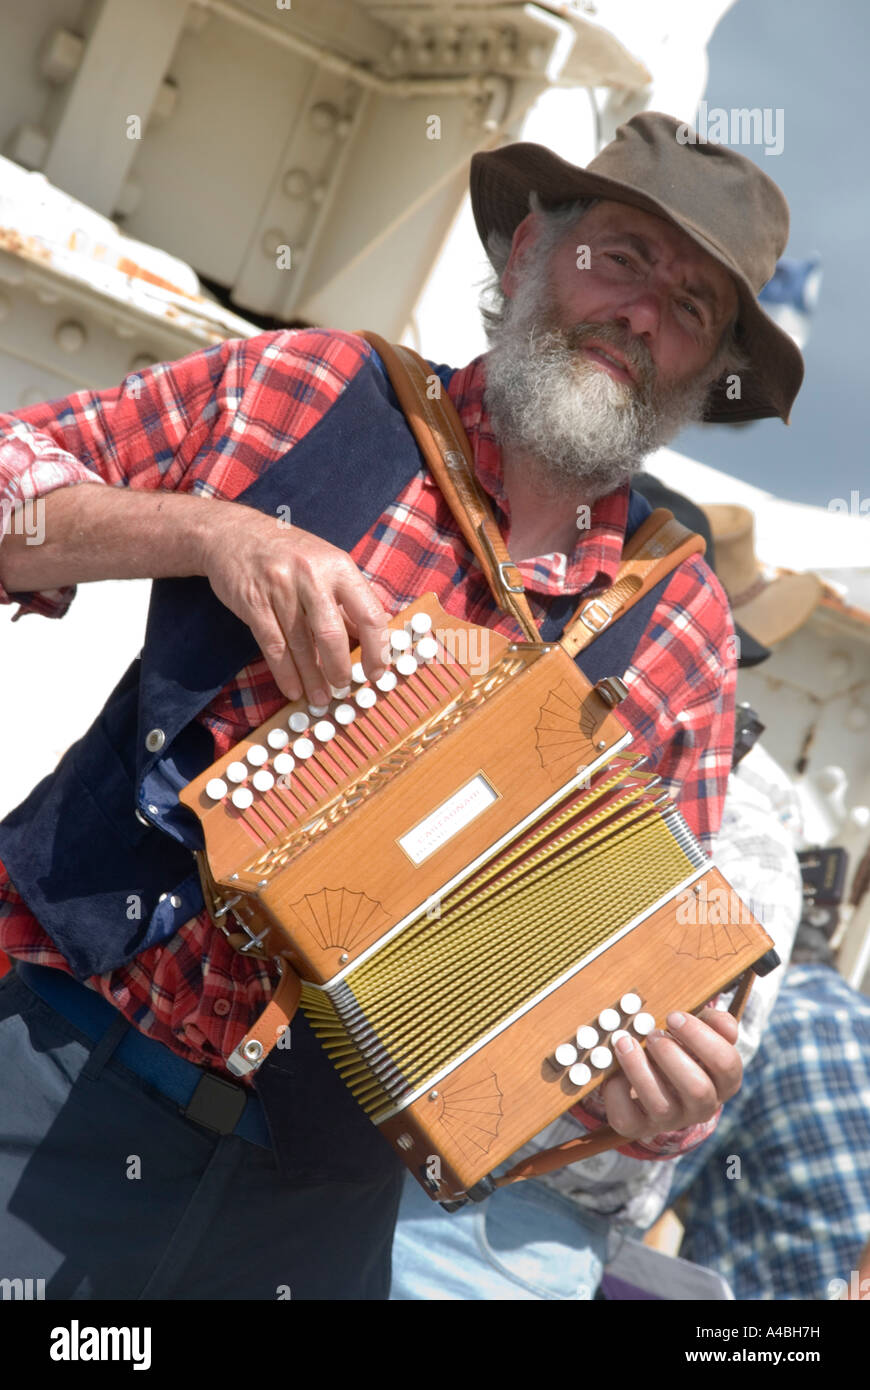 A performer at the Australian Wooden Boat Festival 2007 in Hobart Tasmania playing a small accordian in a country music band Stock Photo